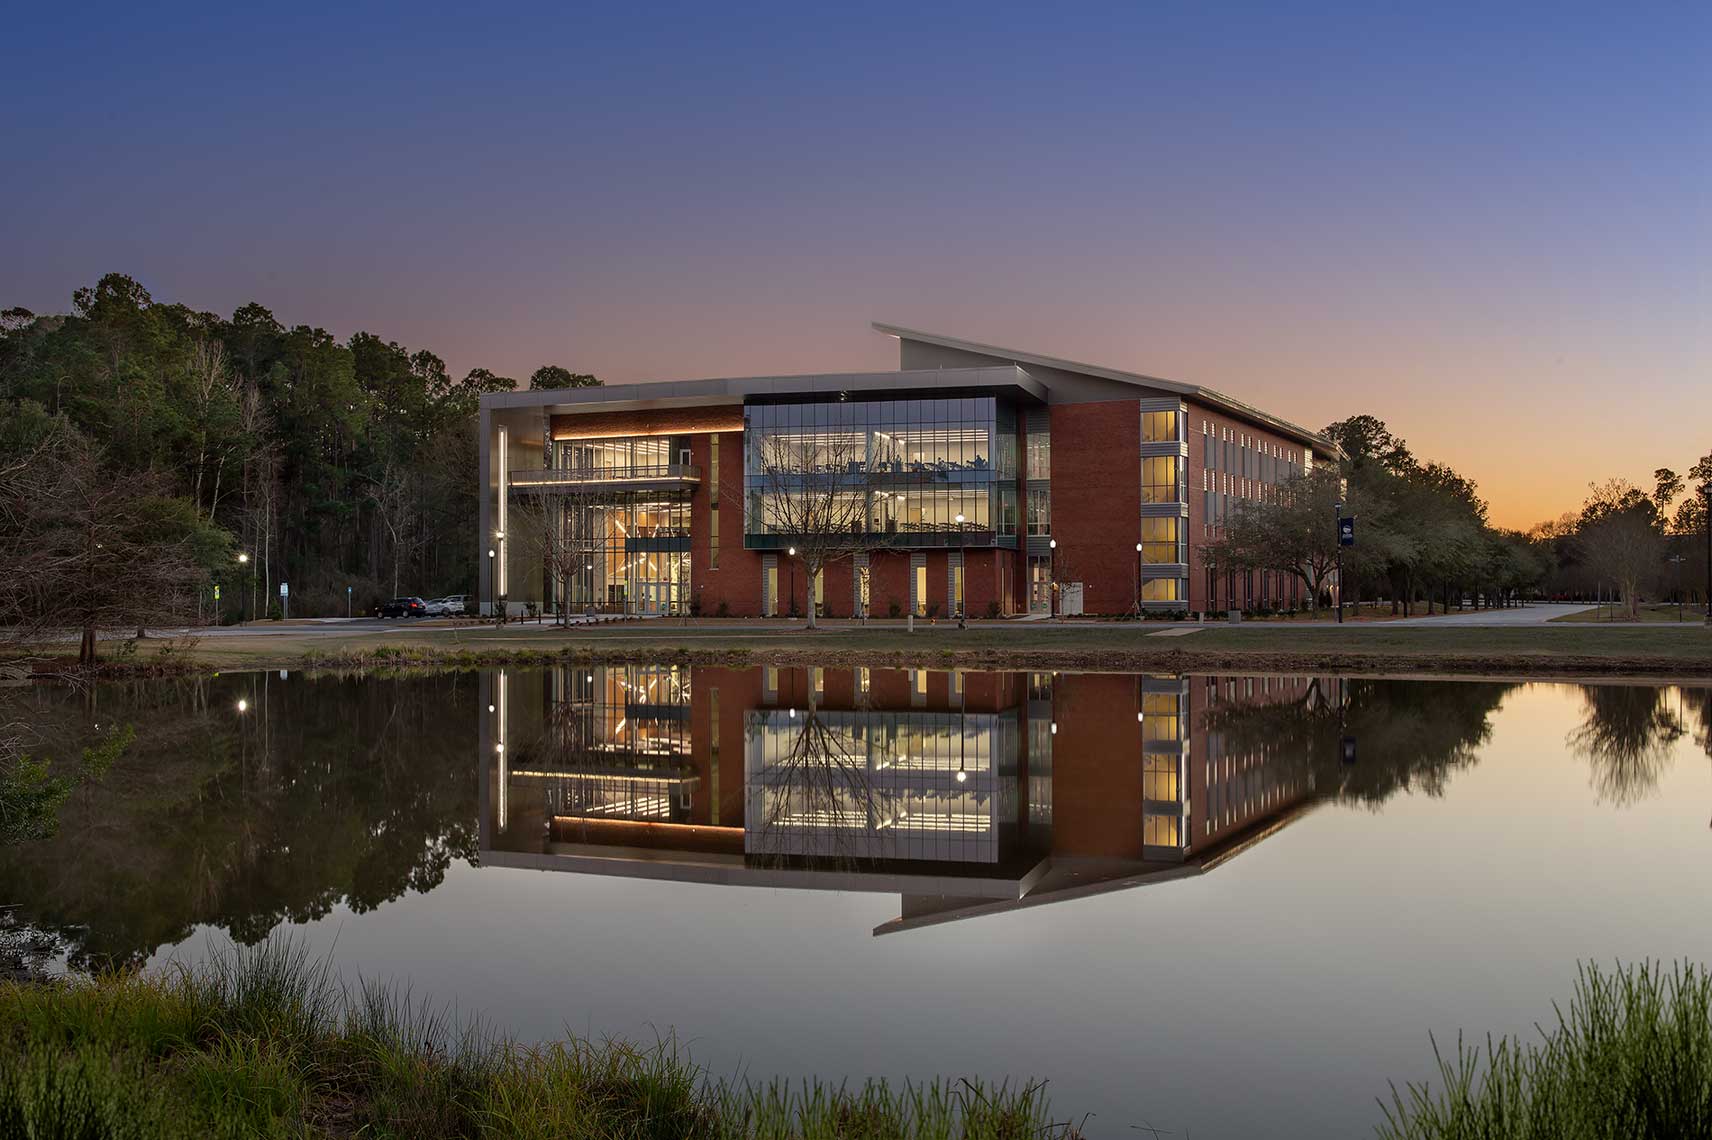 A twilight view of the Engineering Building and a mirror-like reflection across a pond